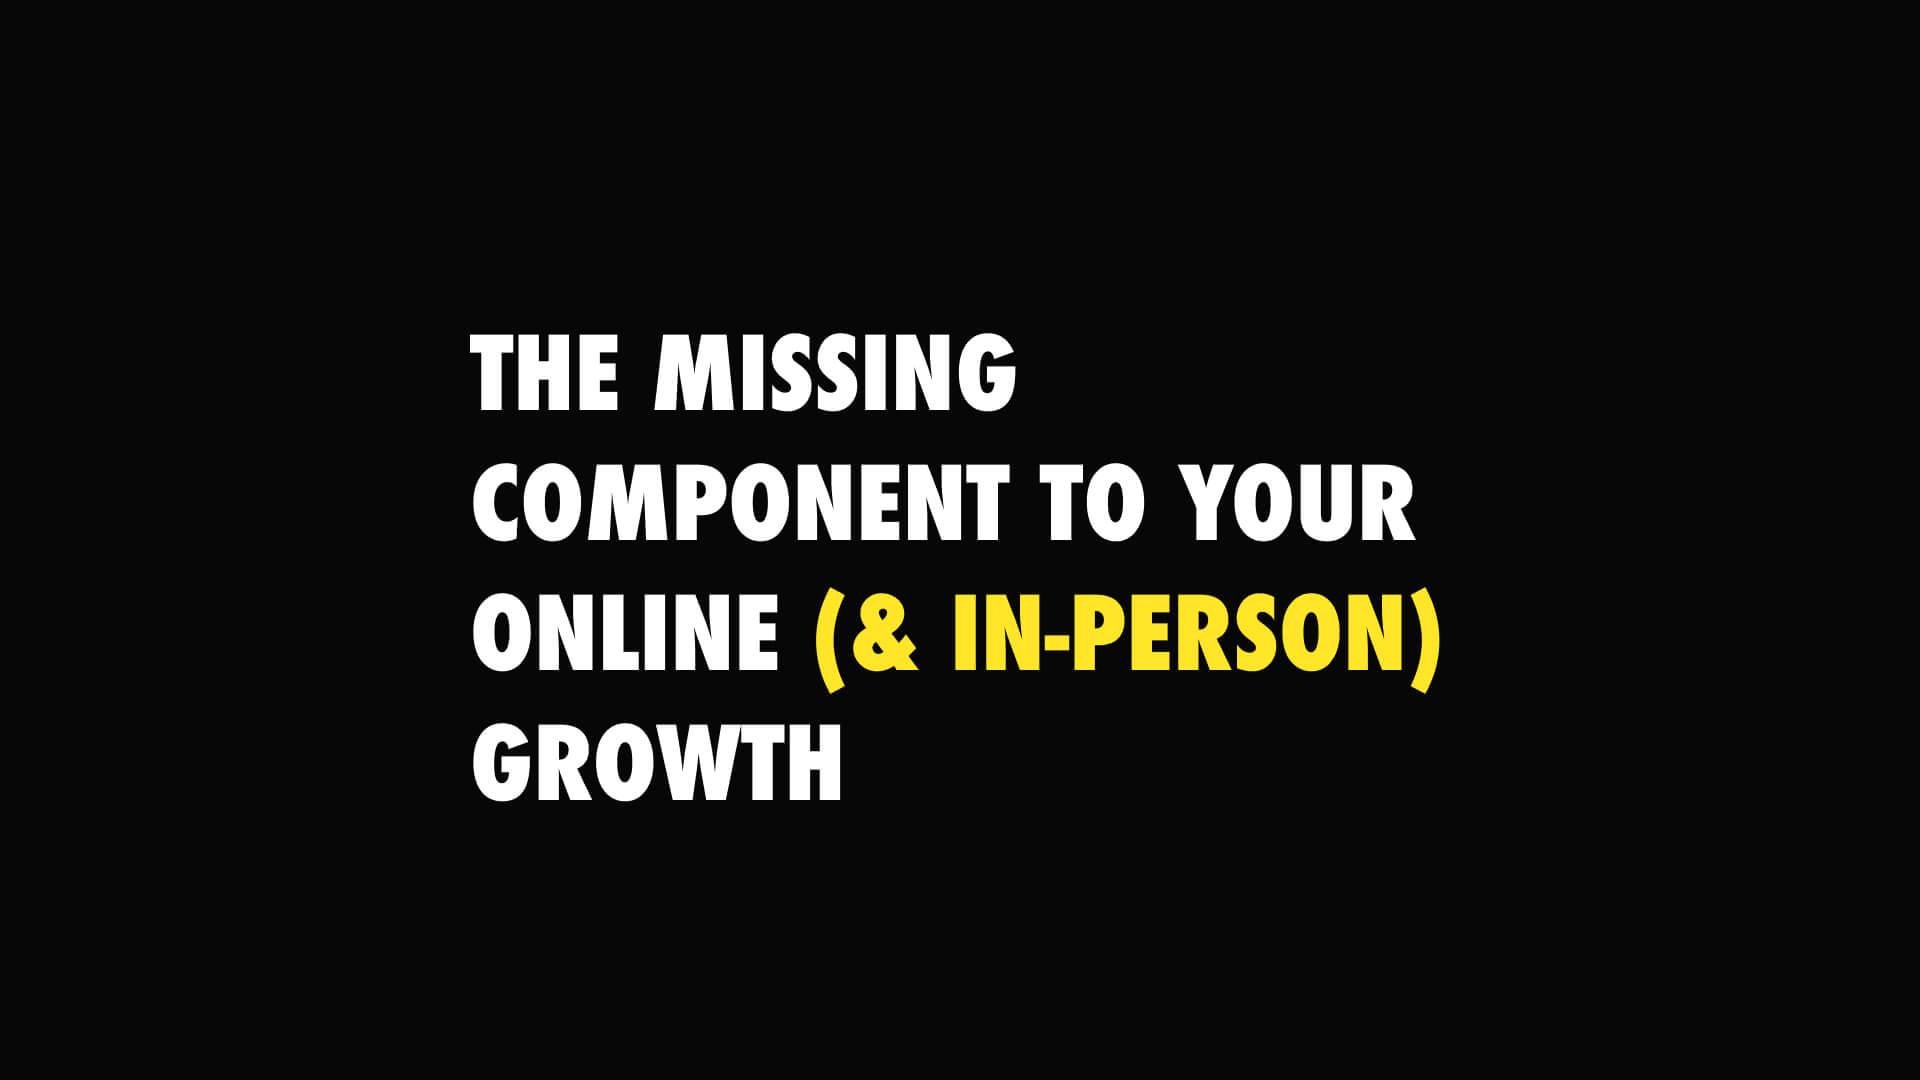 The Missing Component to Your Online (& In-Person) Growth